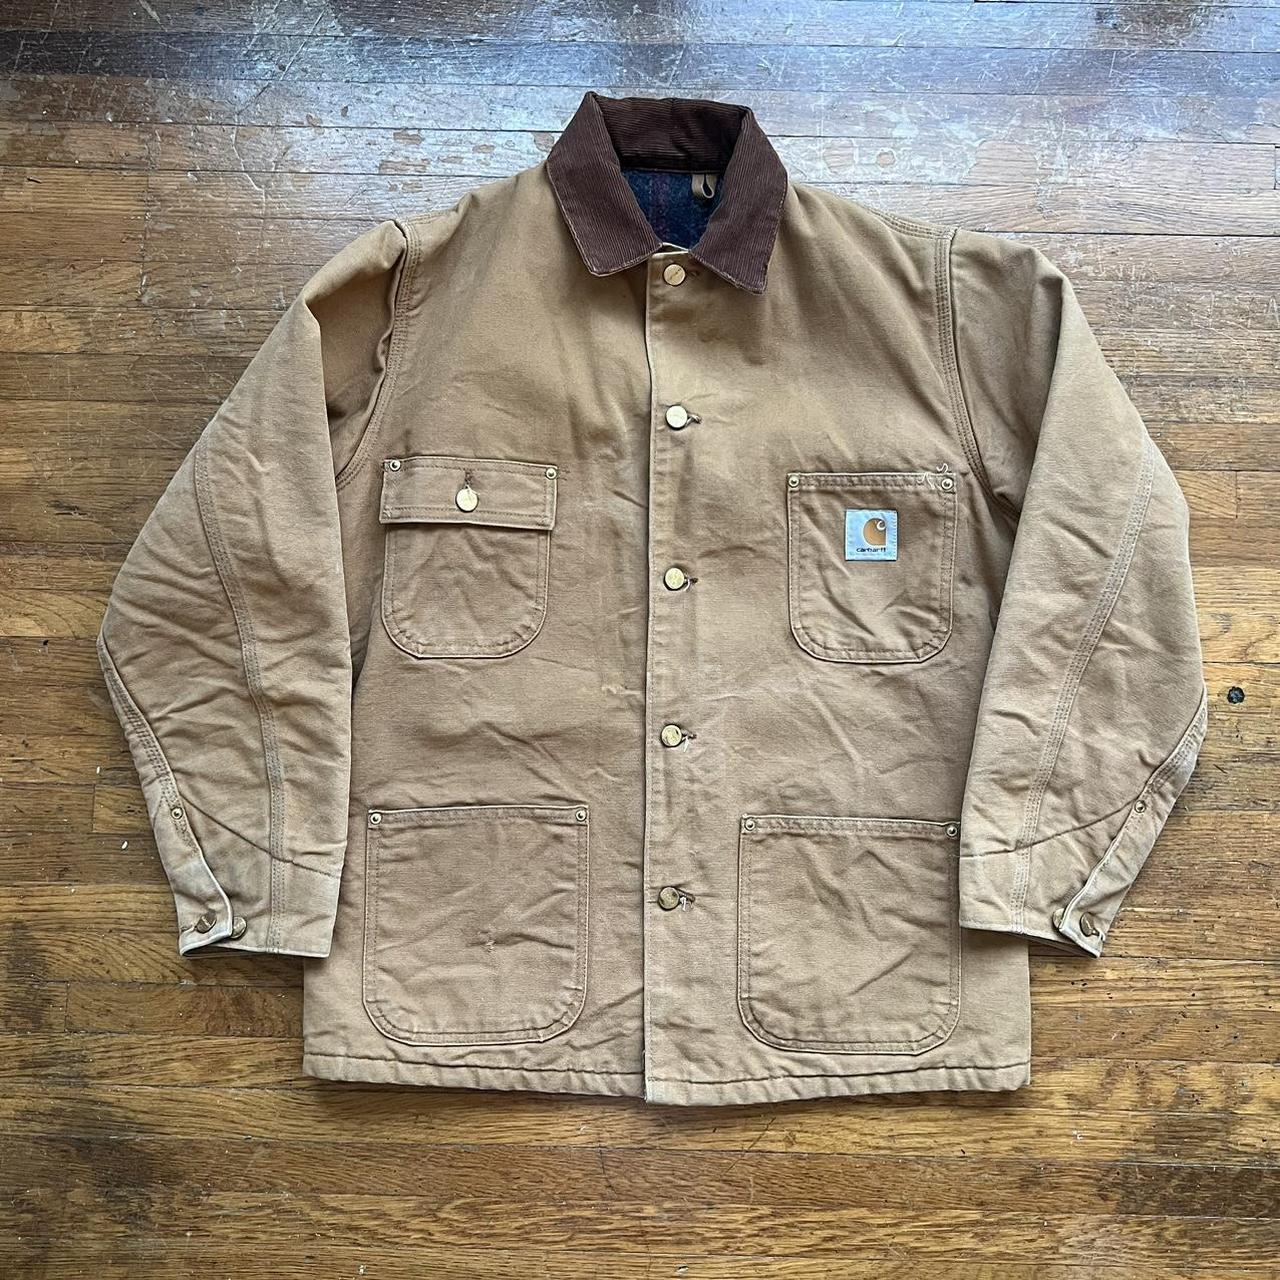 Vintage Carharrt Jacket In like new condition with... - Depop